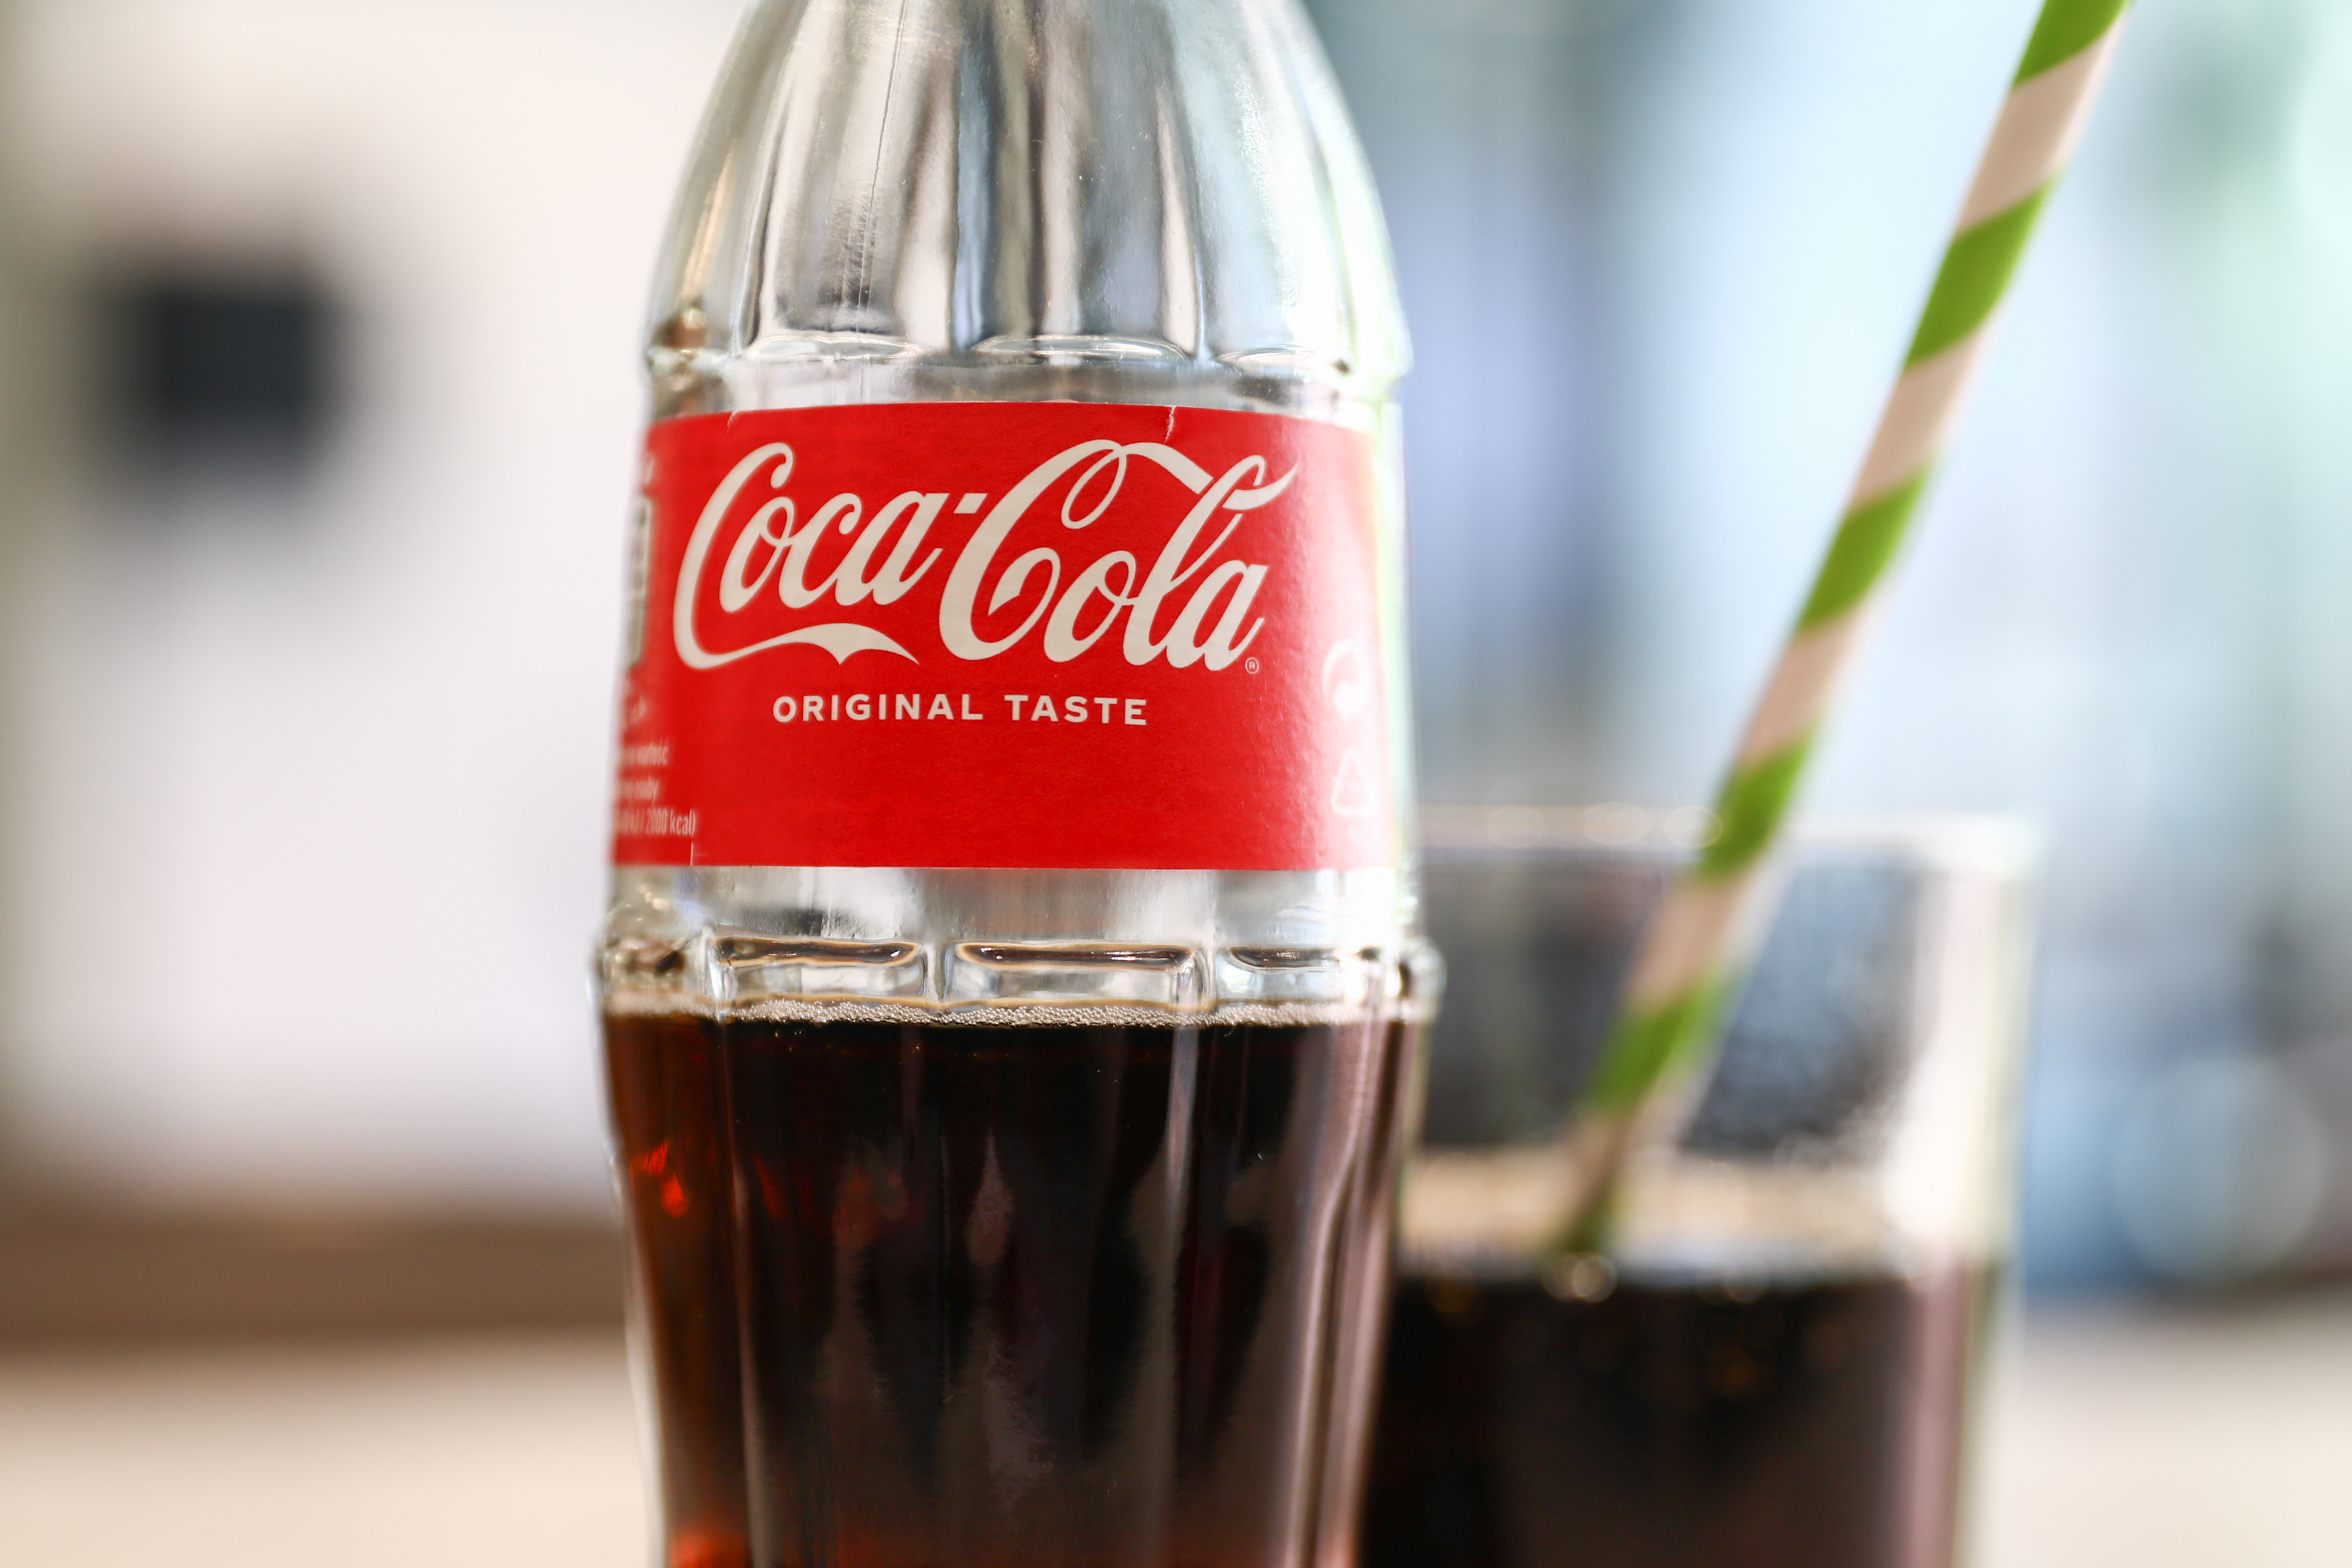 A cold bottle of Coke may provide drivers with a quick-fix solution to their problems